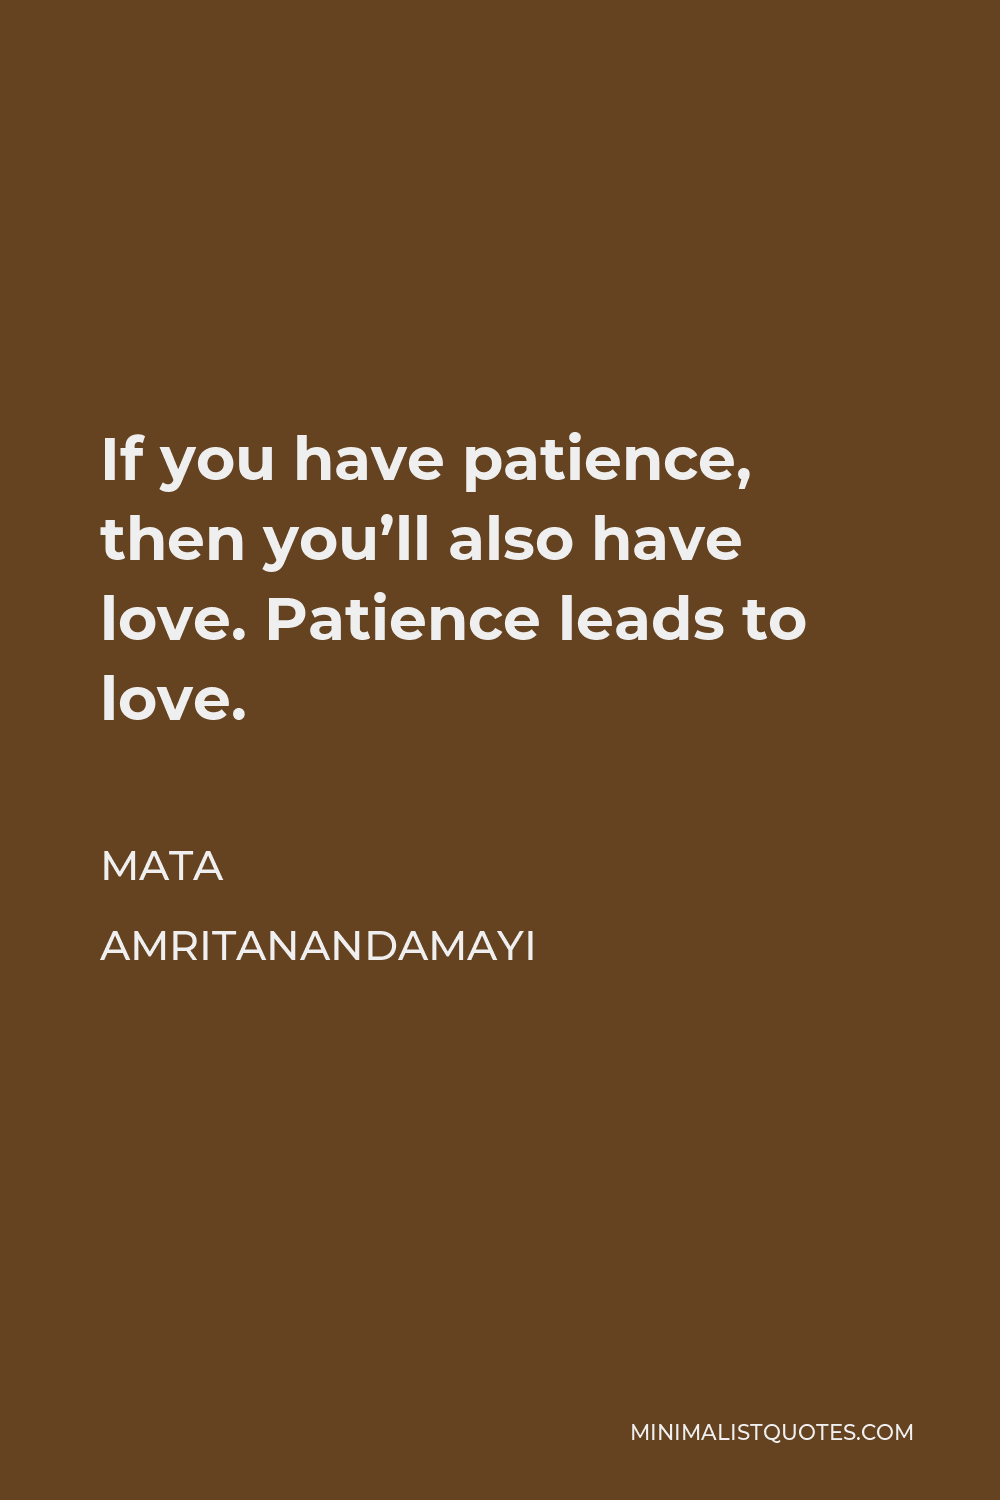 Mata Amritanandamayi Quote - If you have patience, then you’ll also have love. Patience leads to love.